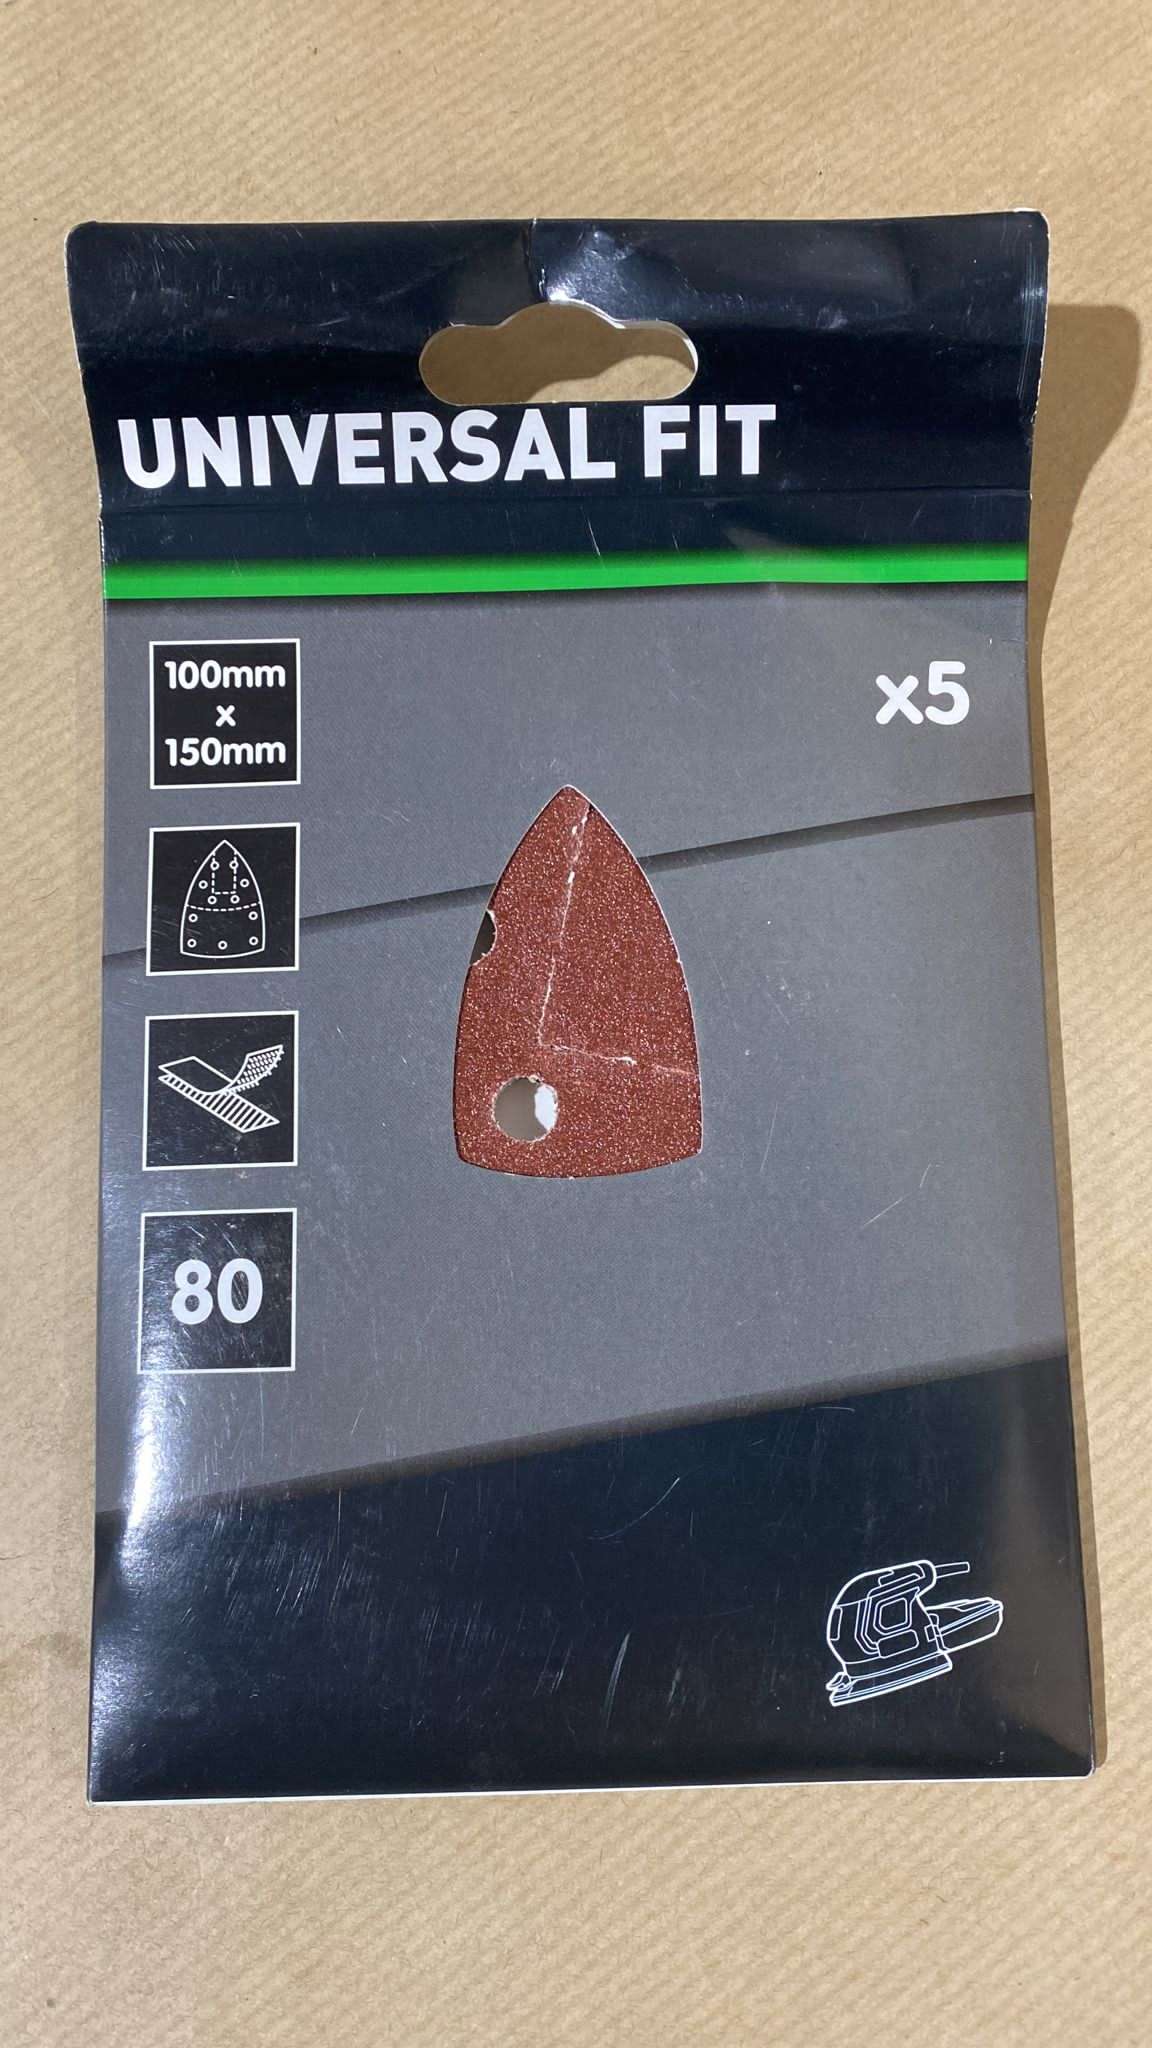 Universal Fit 80 grit Sanding sheet (L)150mm (W)100mm, Pack of 5 - 9003